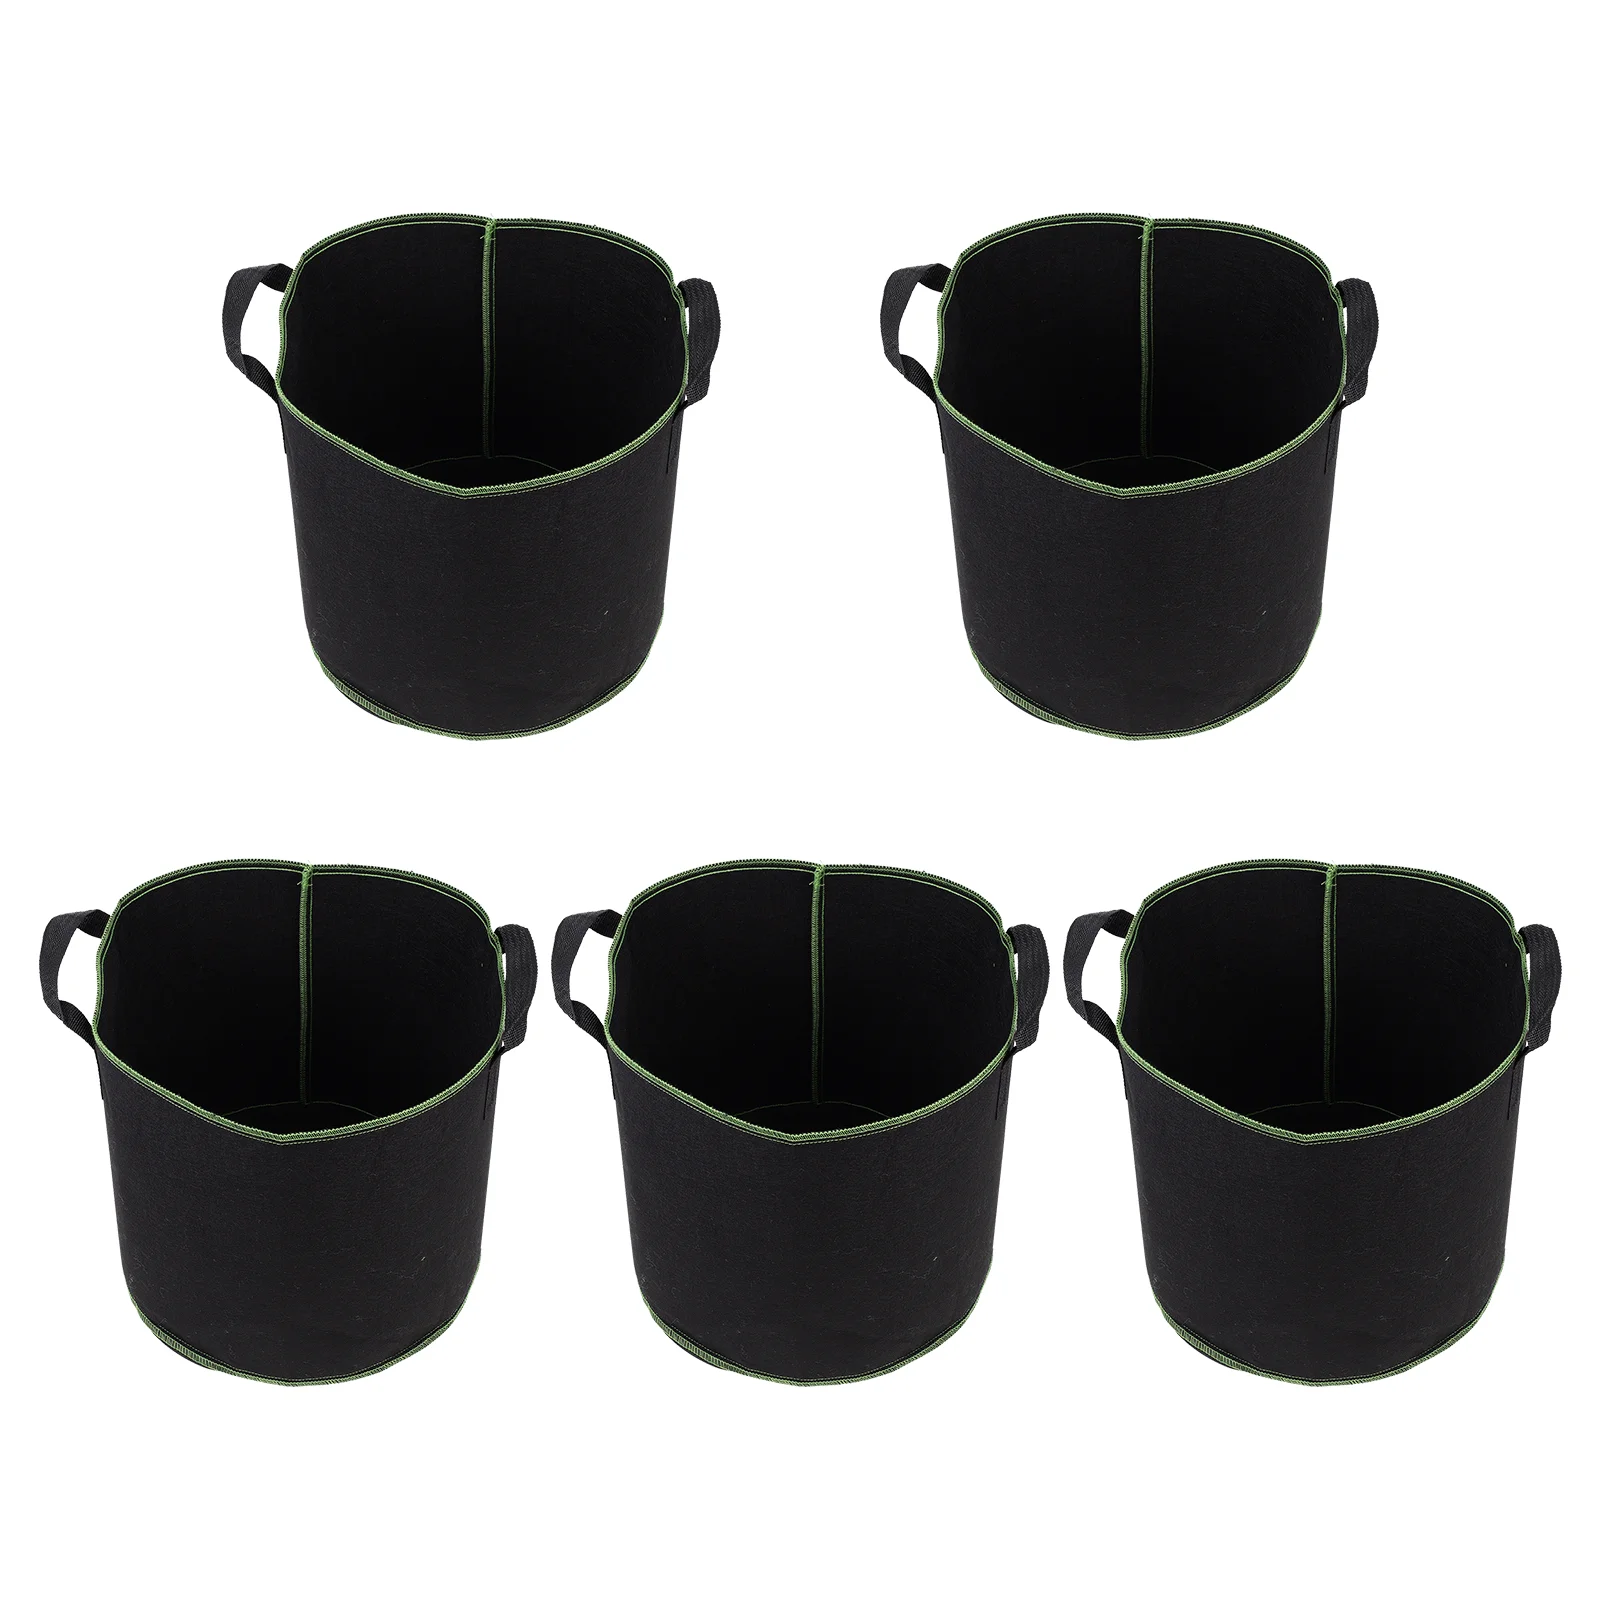 

5 Pcs Seedling Bag Grow Bags Plant Growing Vegetable Planting Vegetables Pouches Non-woven Fabric Nursery Nursing Flower